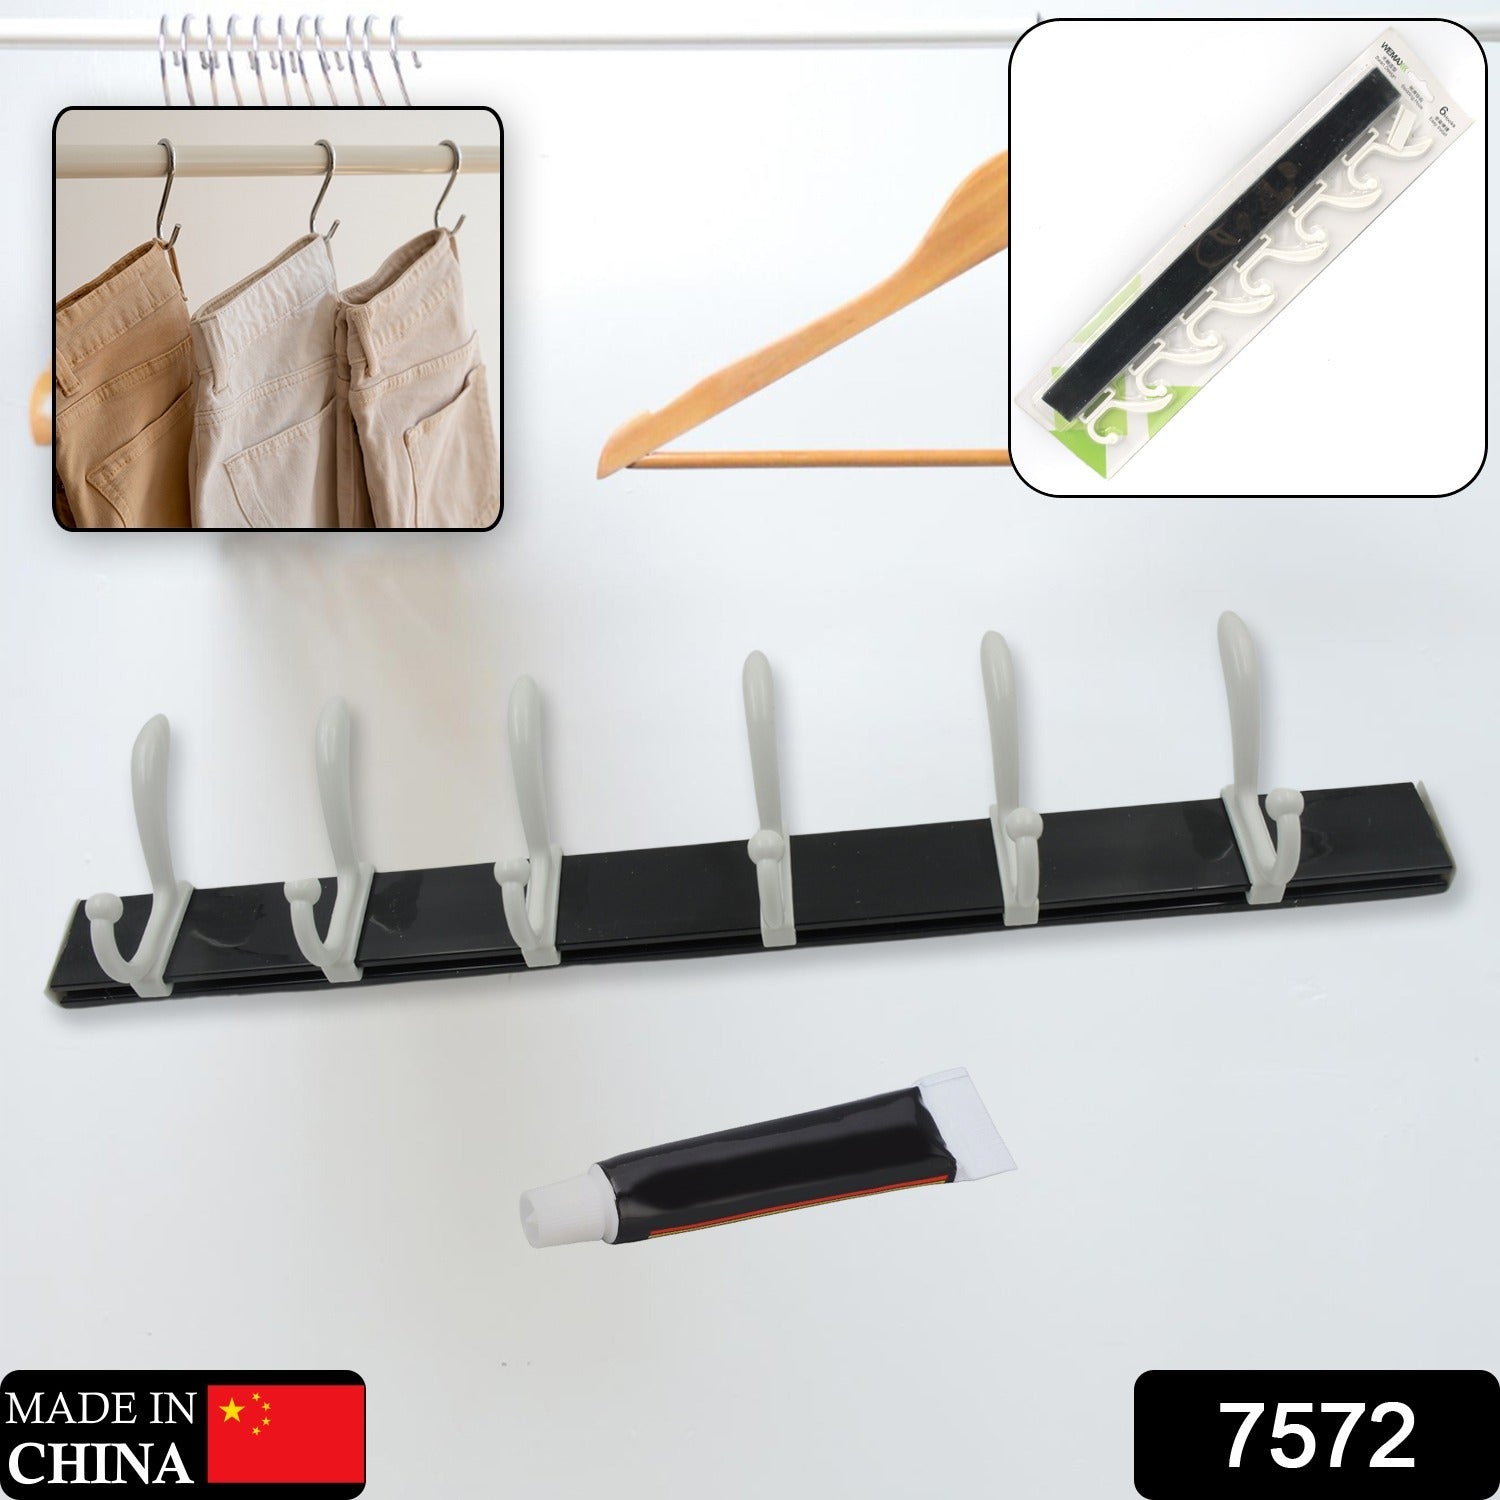 7572 Cloth hanger, Wall Door Hooks Rail for Hanging Clothes for Hanging Hook Rack Rail, Extra Long Coat Hanger Wall Mount for Clothes, Jacket, Hats, 6 Hook With Eco-friendly Liquid Adhesive Glue